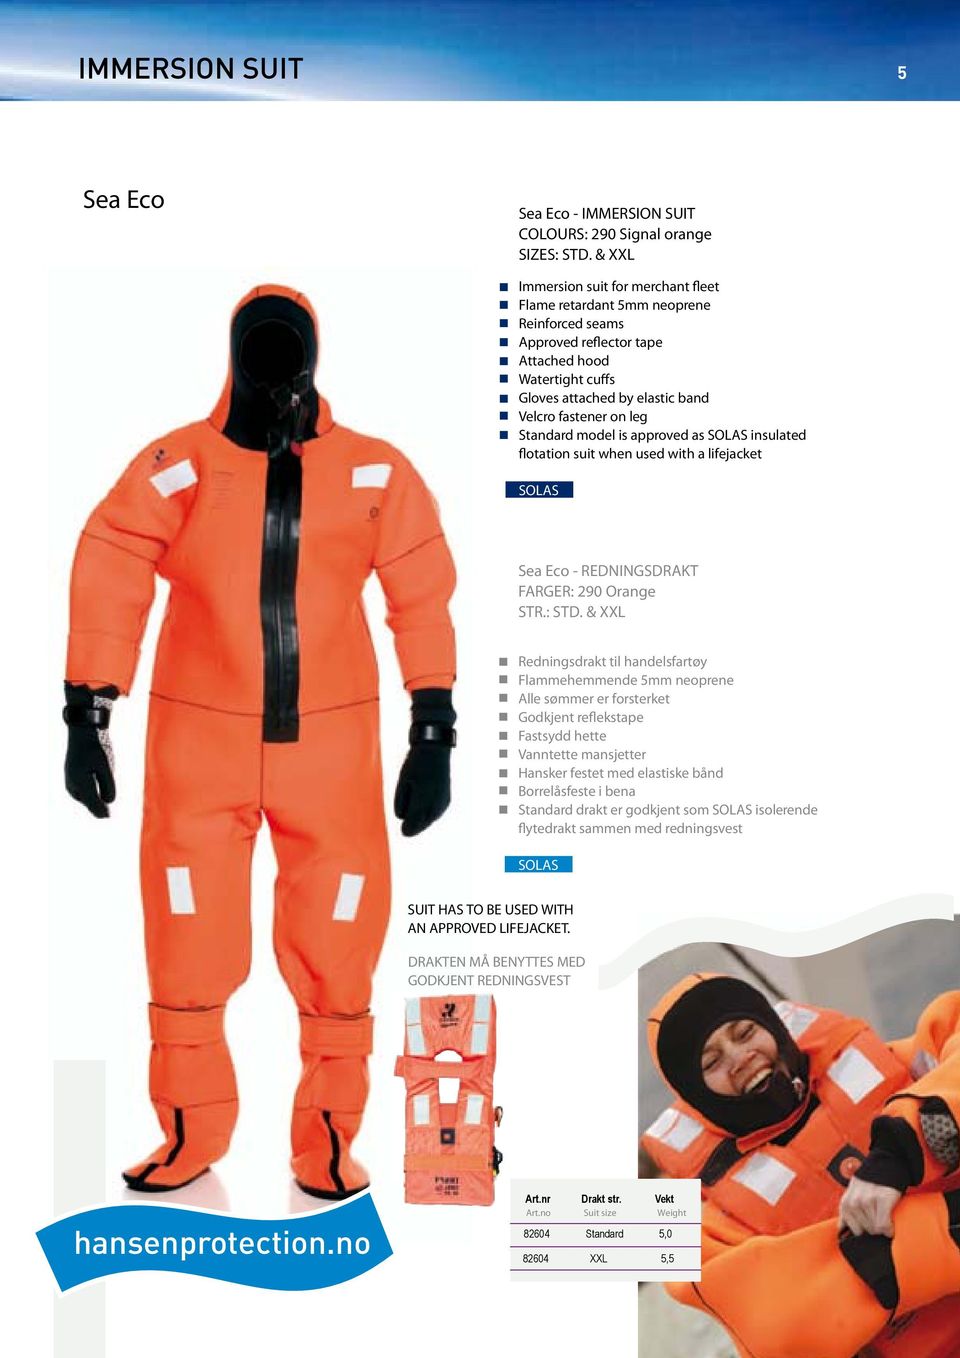 Standard model is approved as insulated flotation suit when used with a lifejacket Sea Eco - REDNINGSDRAKT FARGER: 290 Orange STR.: STD.